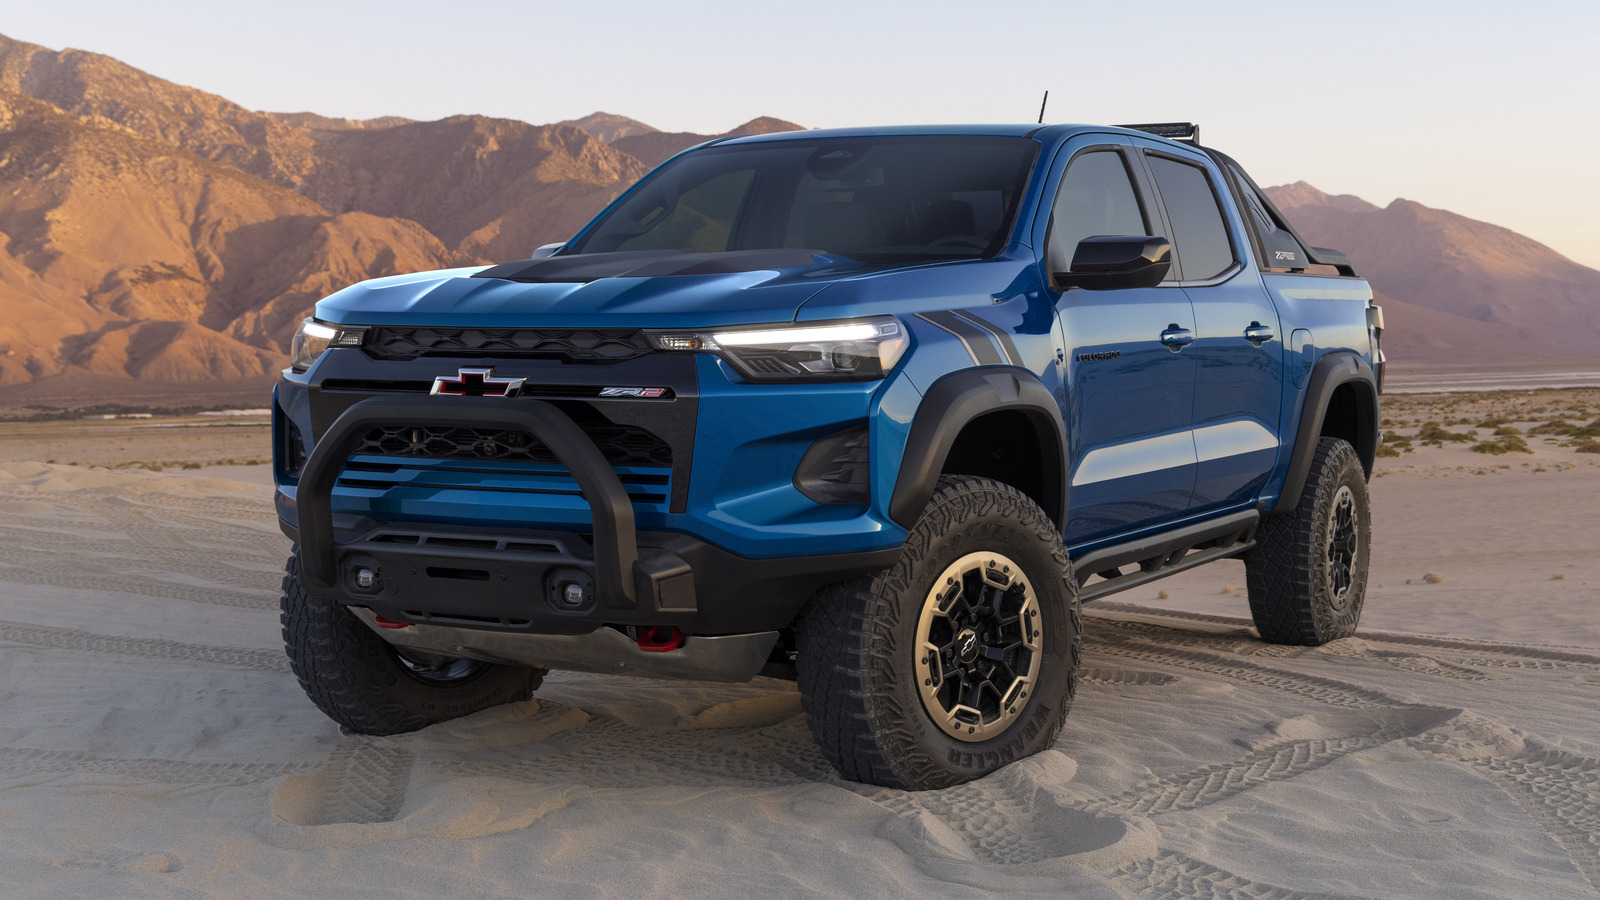 2023 Chevrolet Colorado Focuses Its Upgrades Where They Matter Most